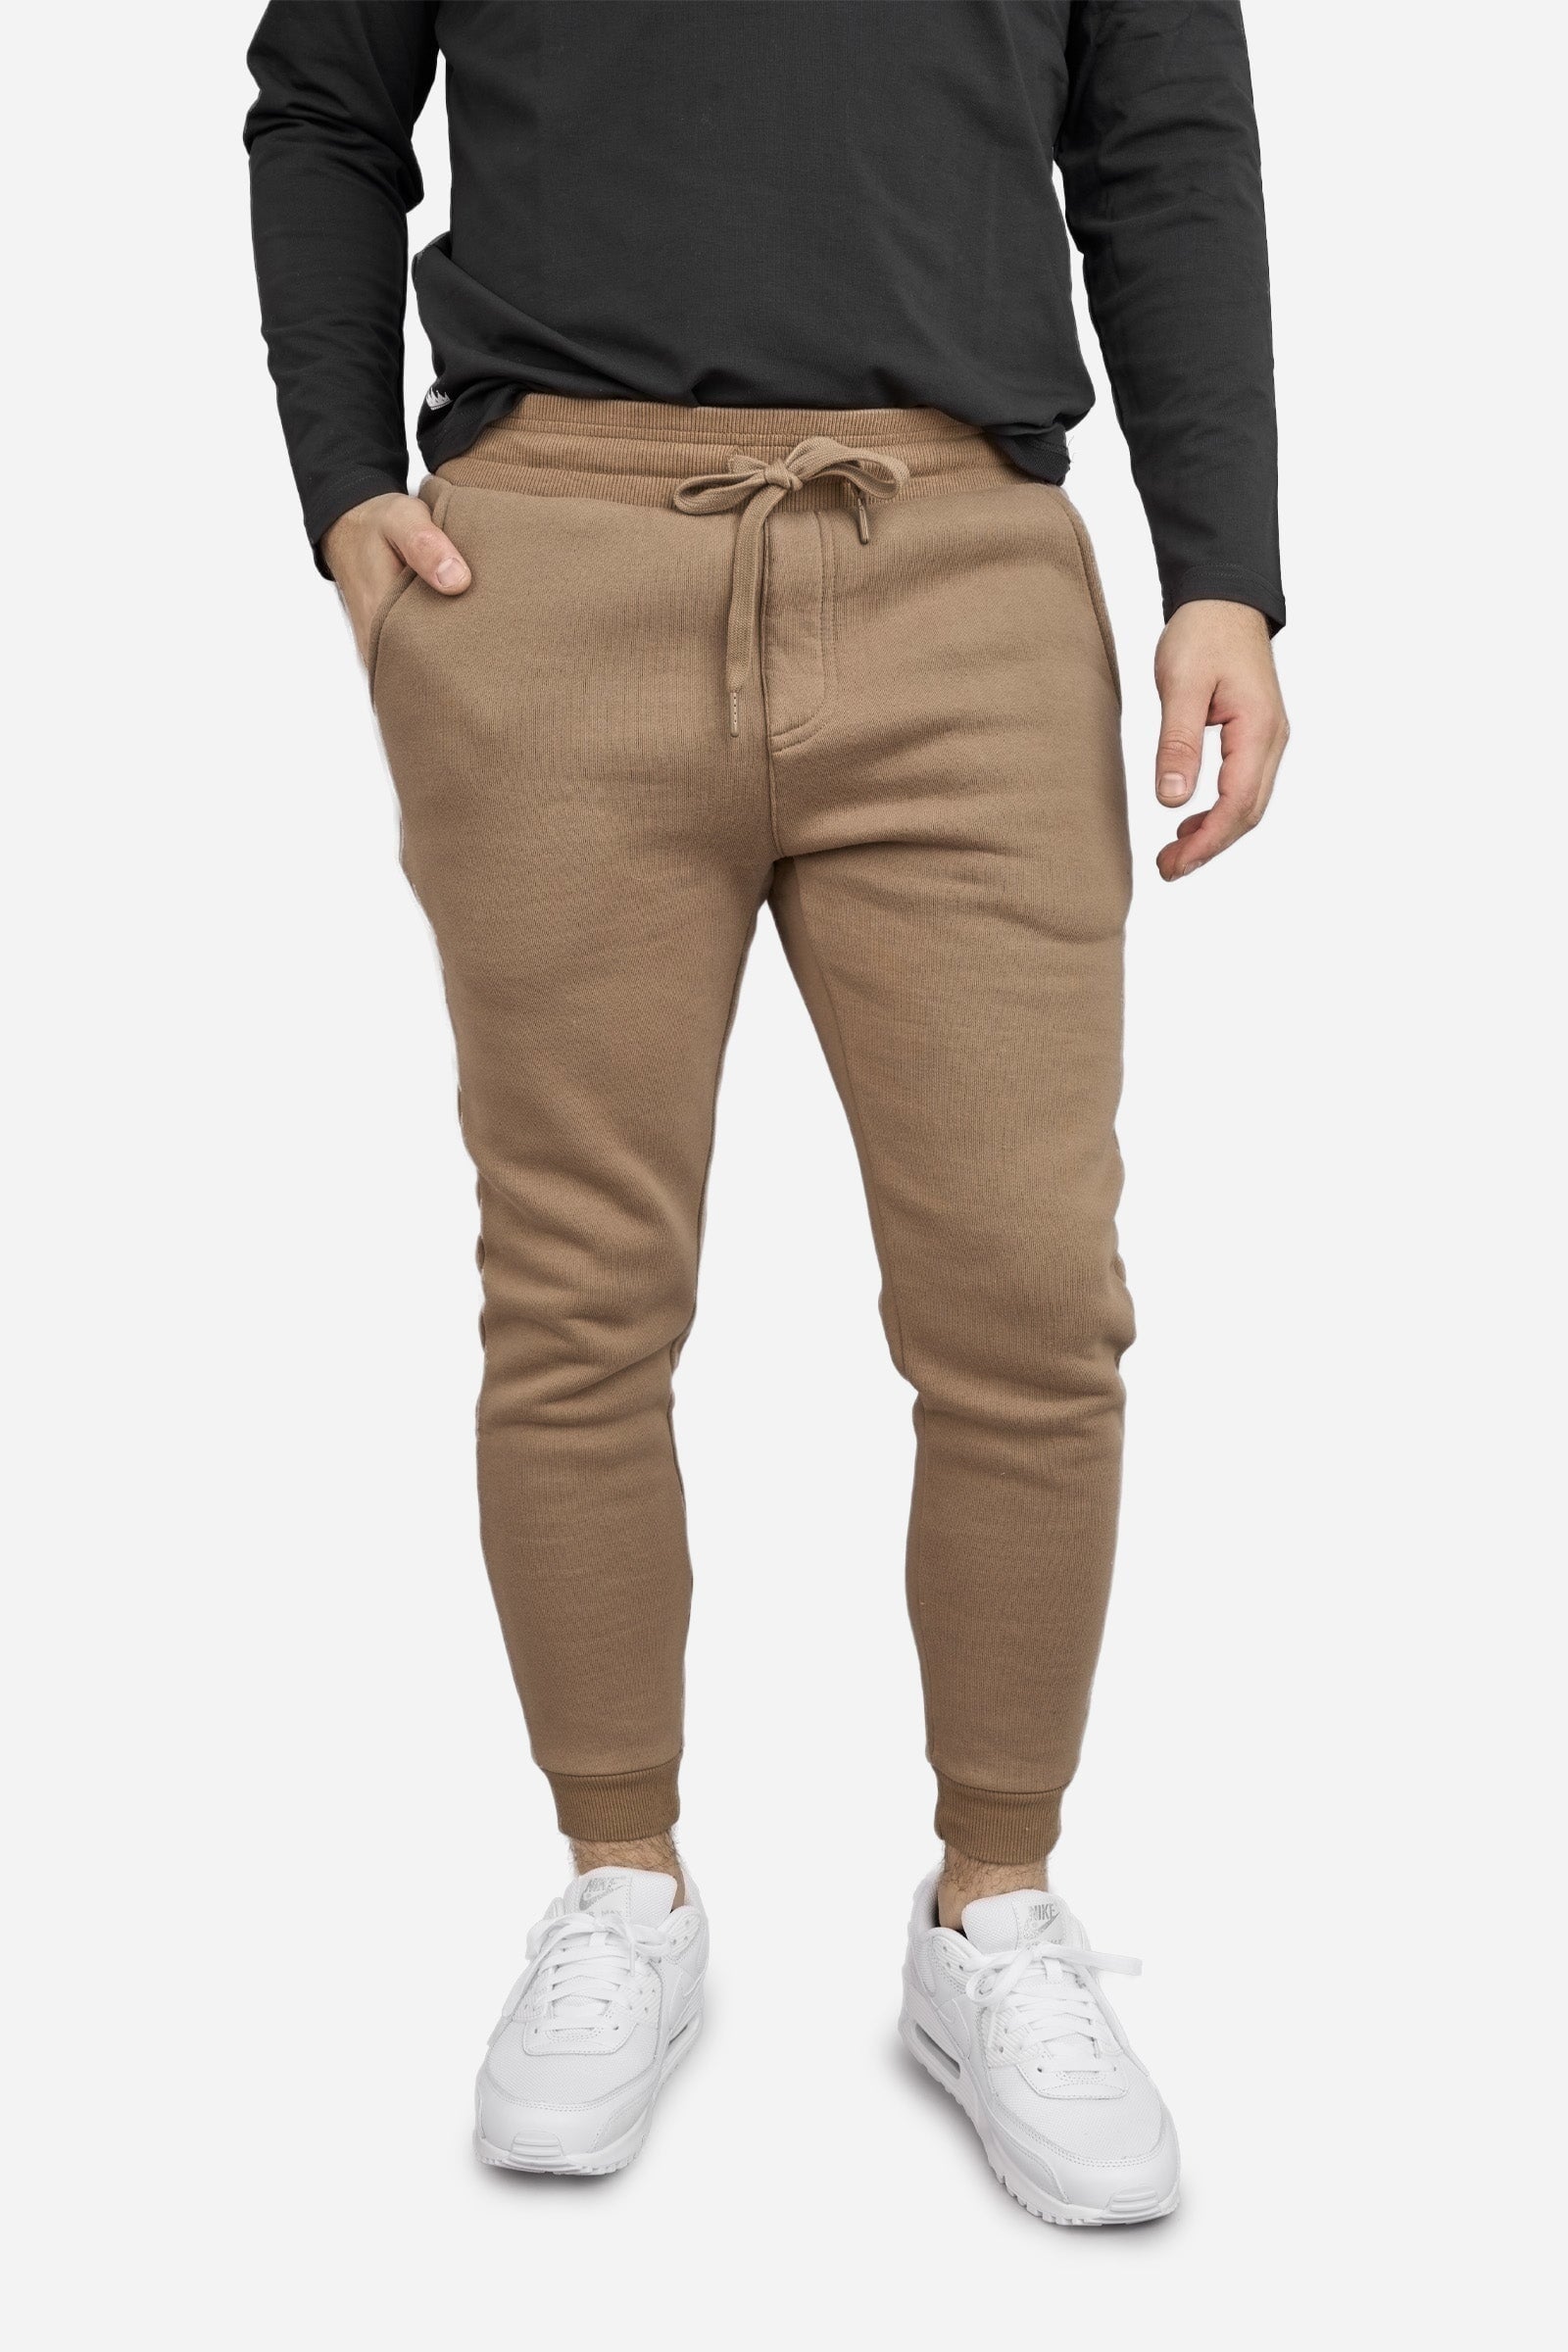 Buy Brown Trousers & Pants for Men by R&B Online | Ajio.com